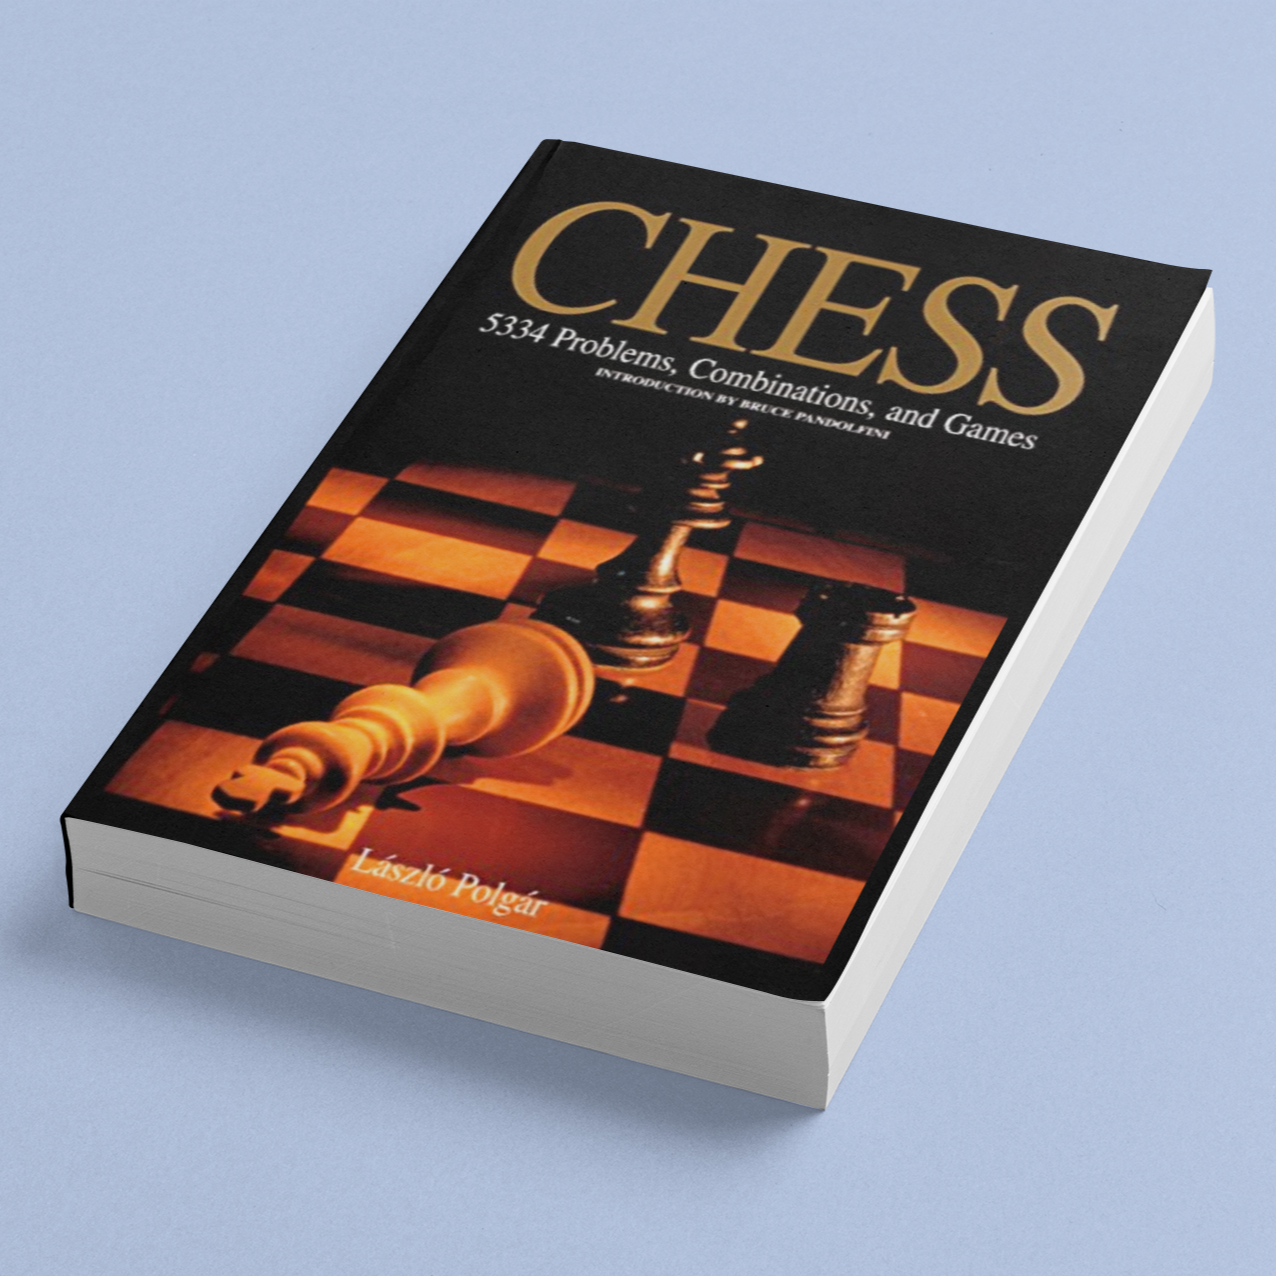 Chess 5334 Problems, Combinations and Games PDF, PDF, Chess